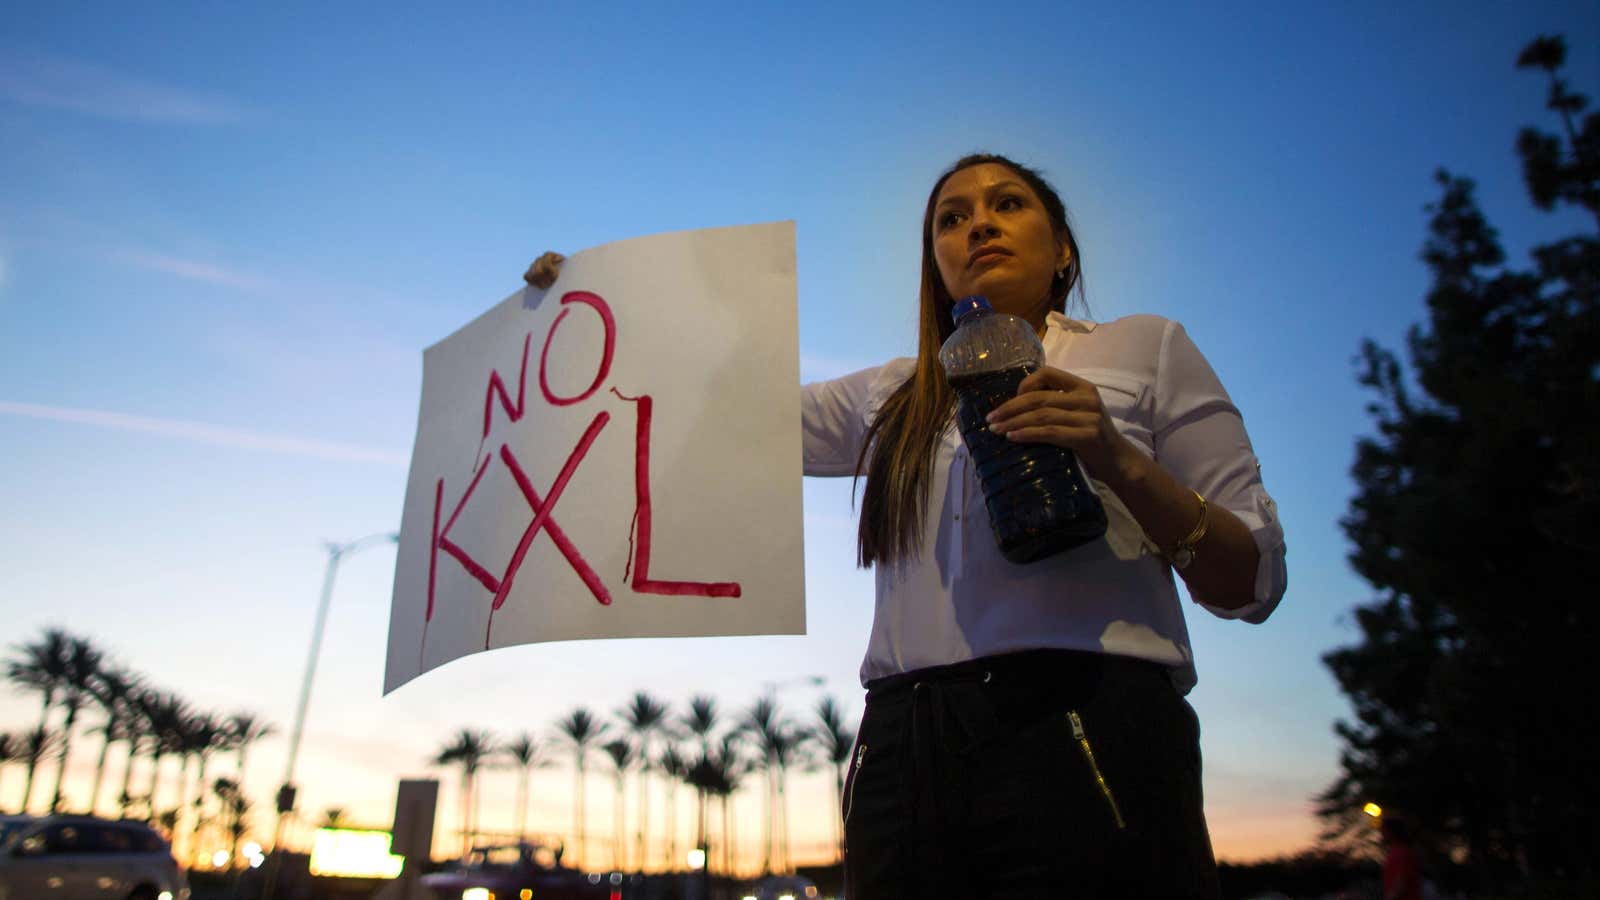 The cancellation of the Keystone XL pipeline was a major victory for activists, but the long game against climate change will require more than campaigns against individual pipelines.